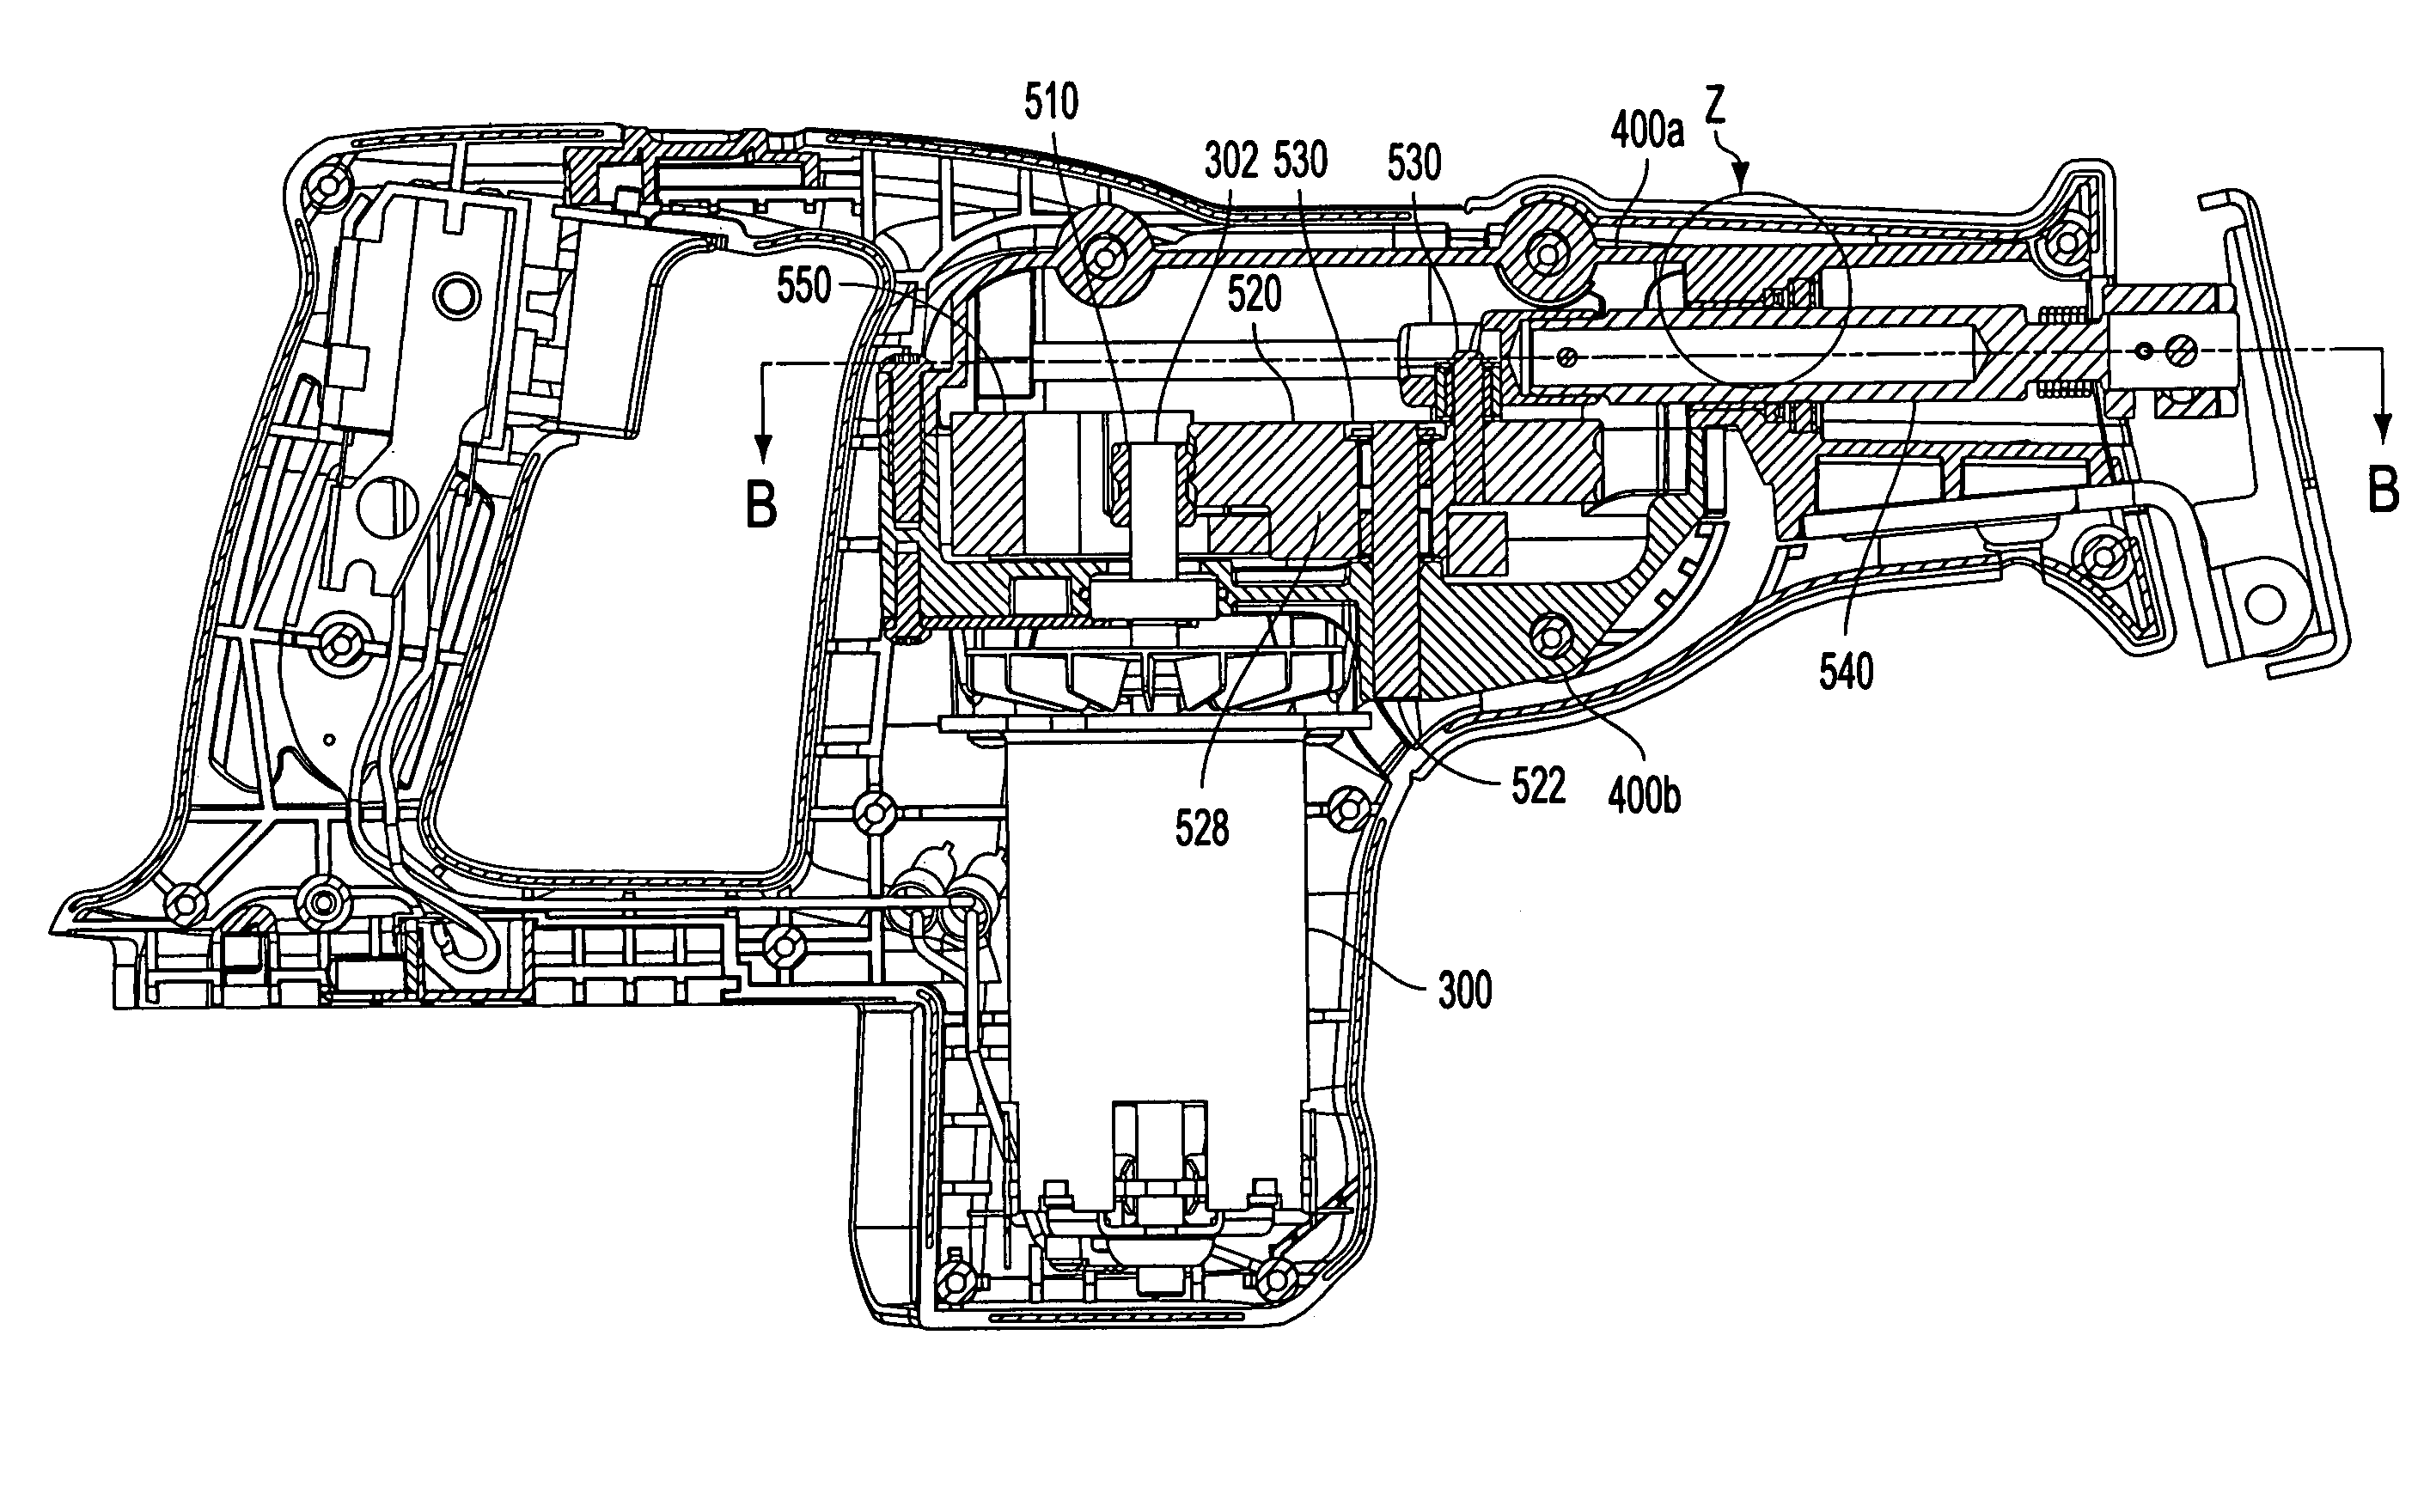 Reciprocating counterweight structure for a reciprocating saw